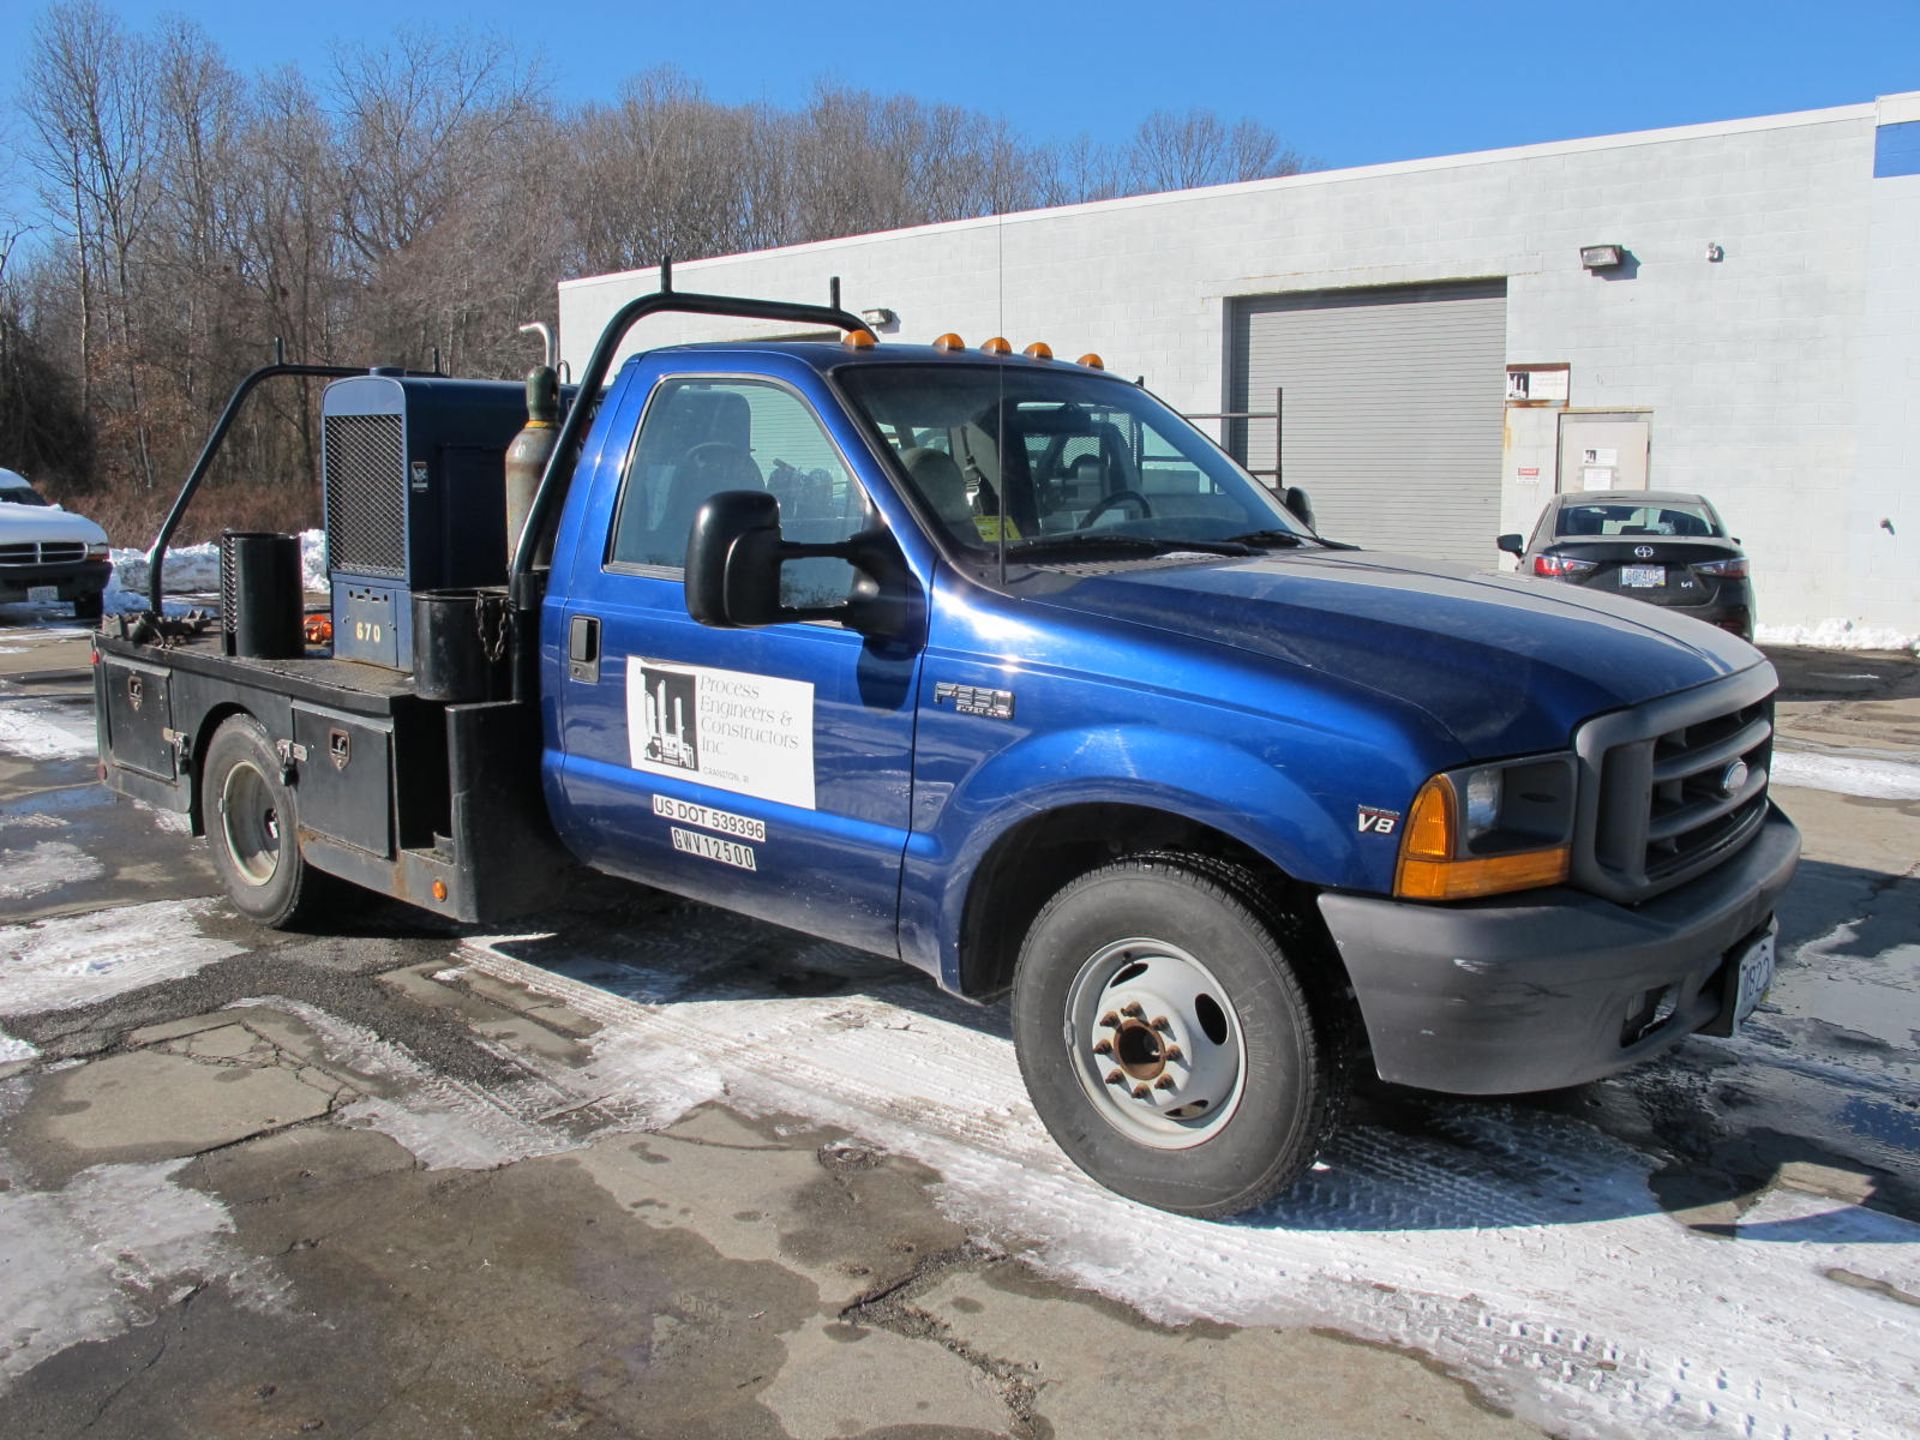 1999 Ford F350 Super Duty Diesel V8 Pick Up Truck Outfitted as Stand Alone Welding Rig. VIN: